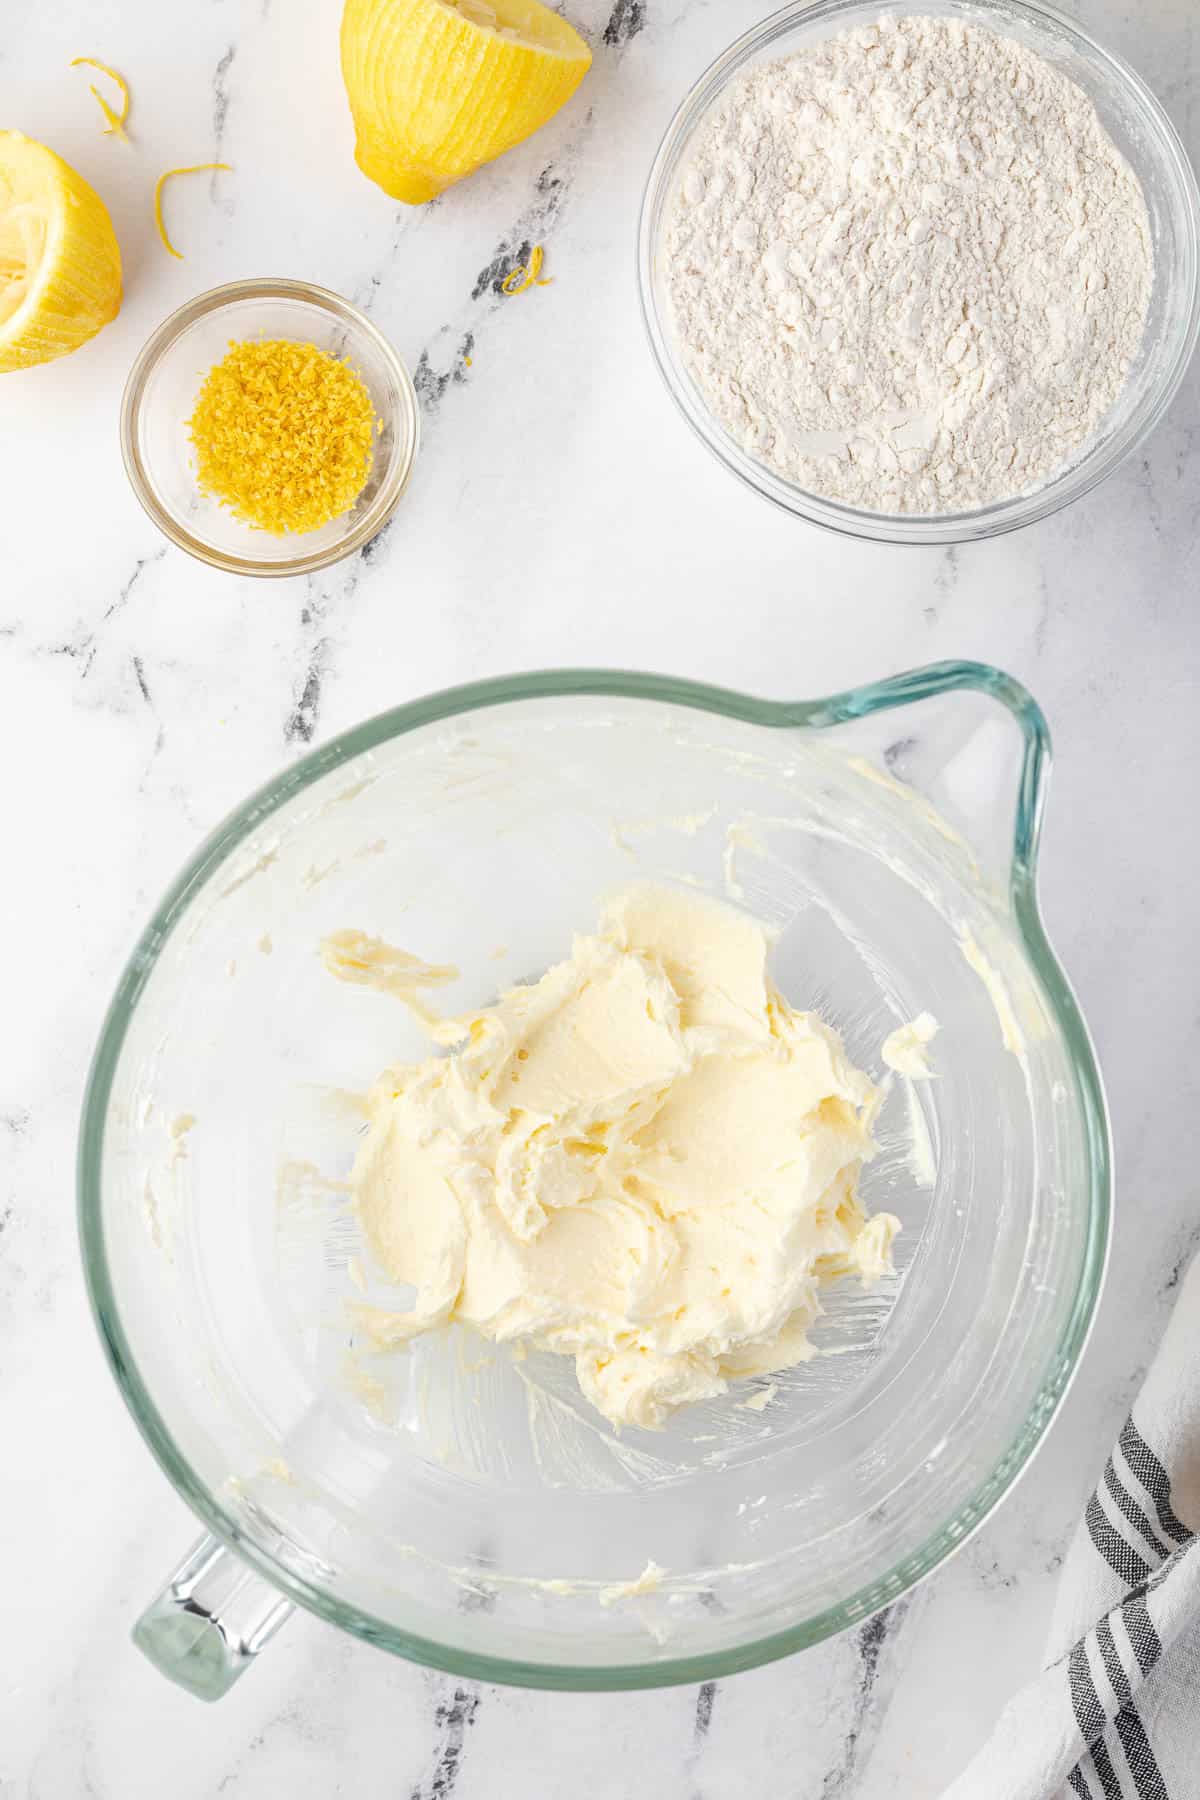 butter and sugar creamed together for crust